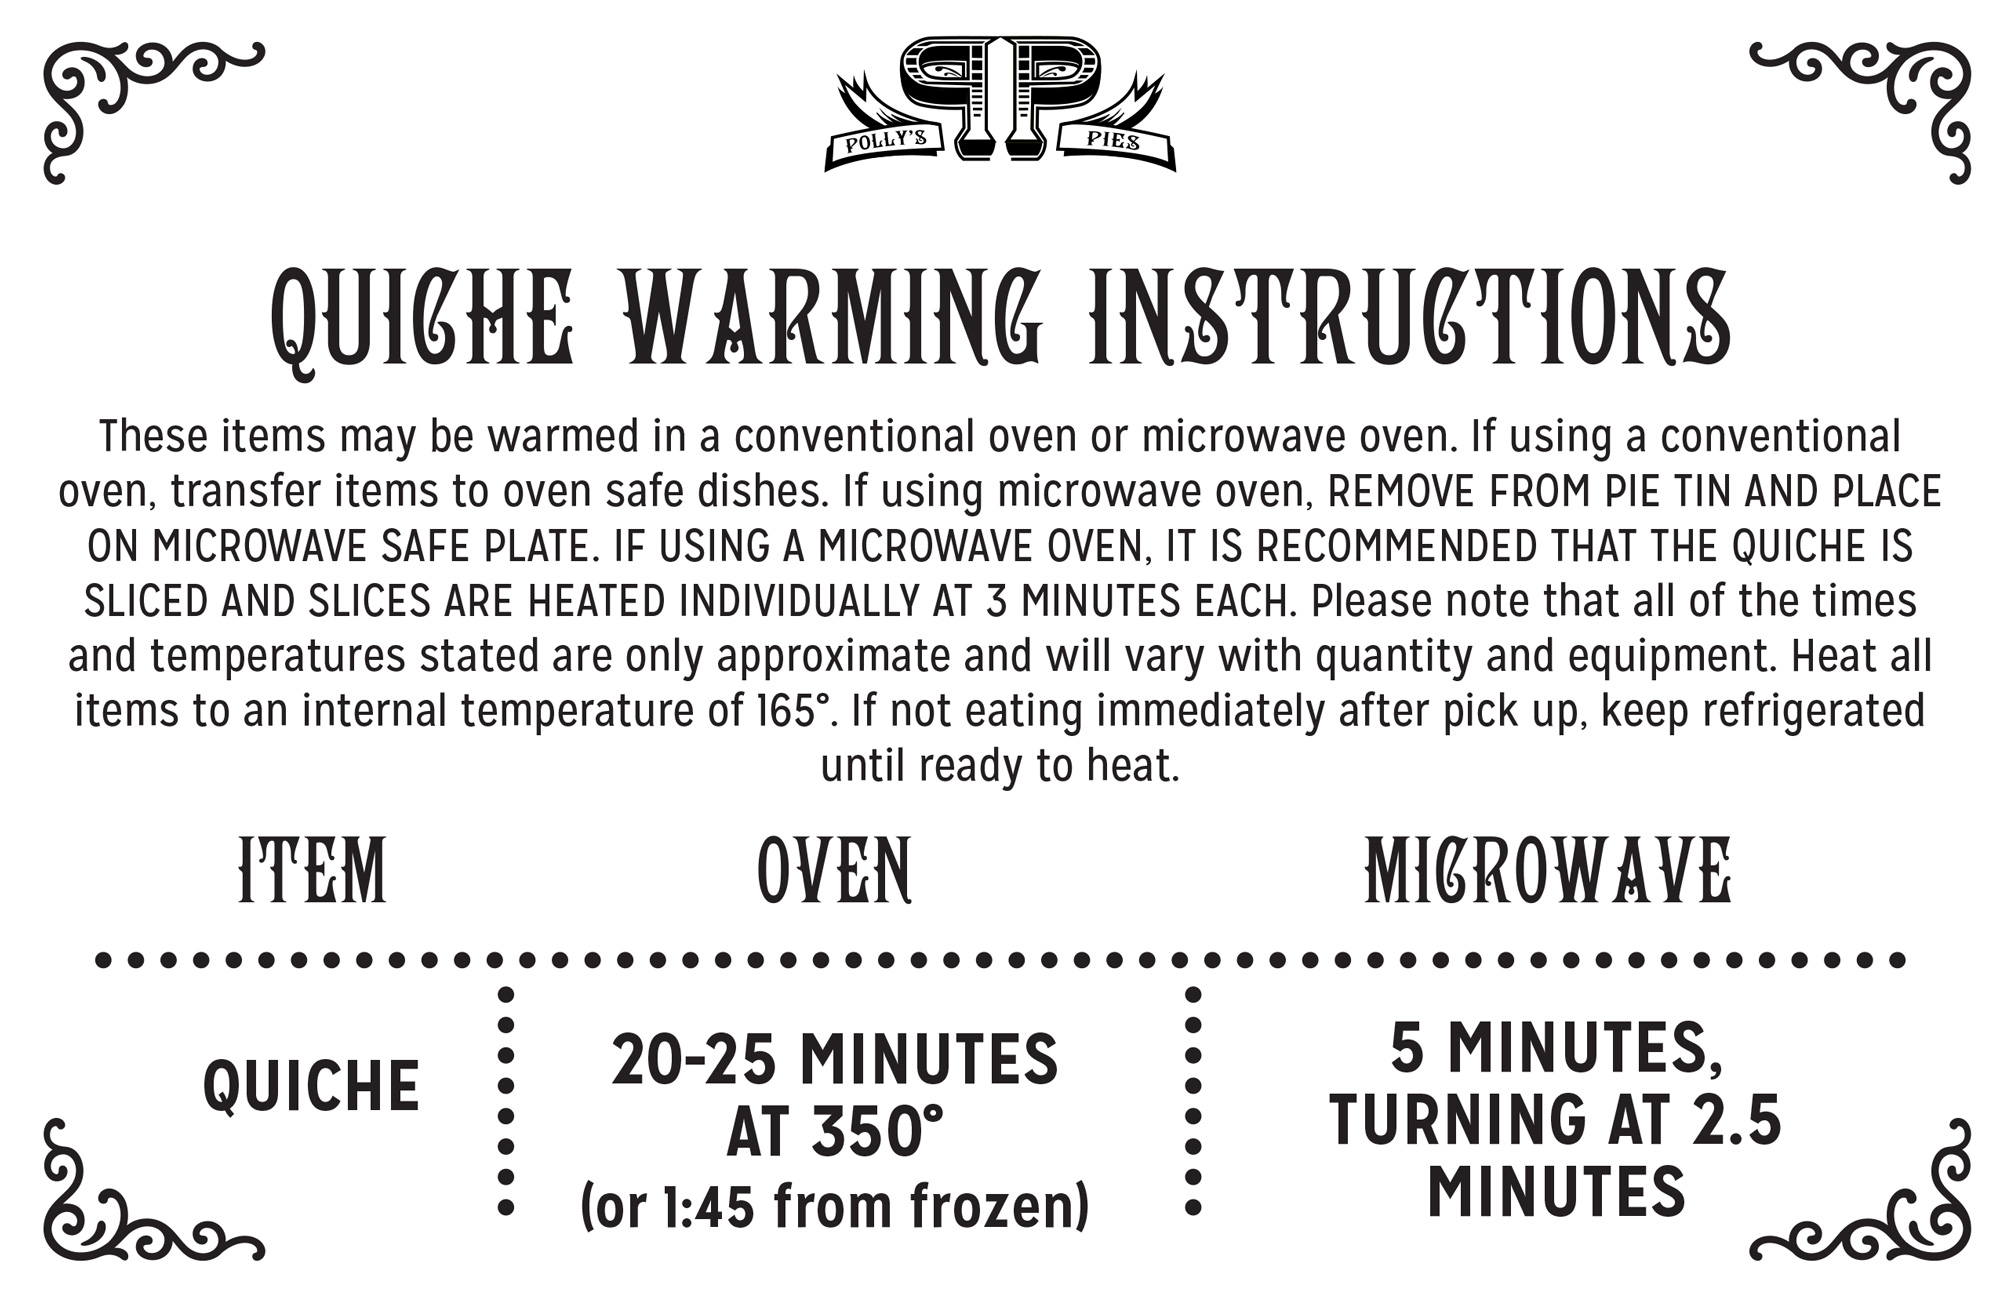 Quiche warming instructions 2